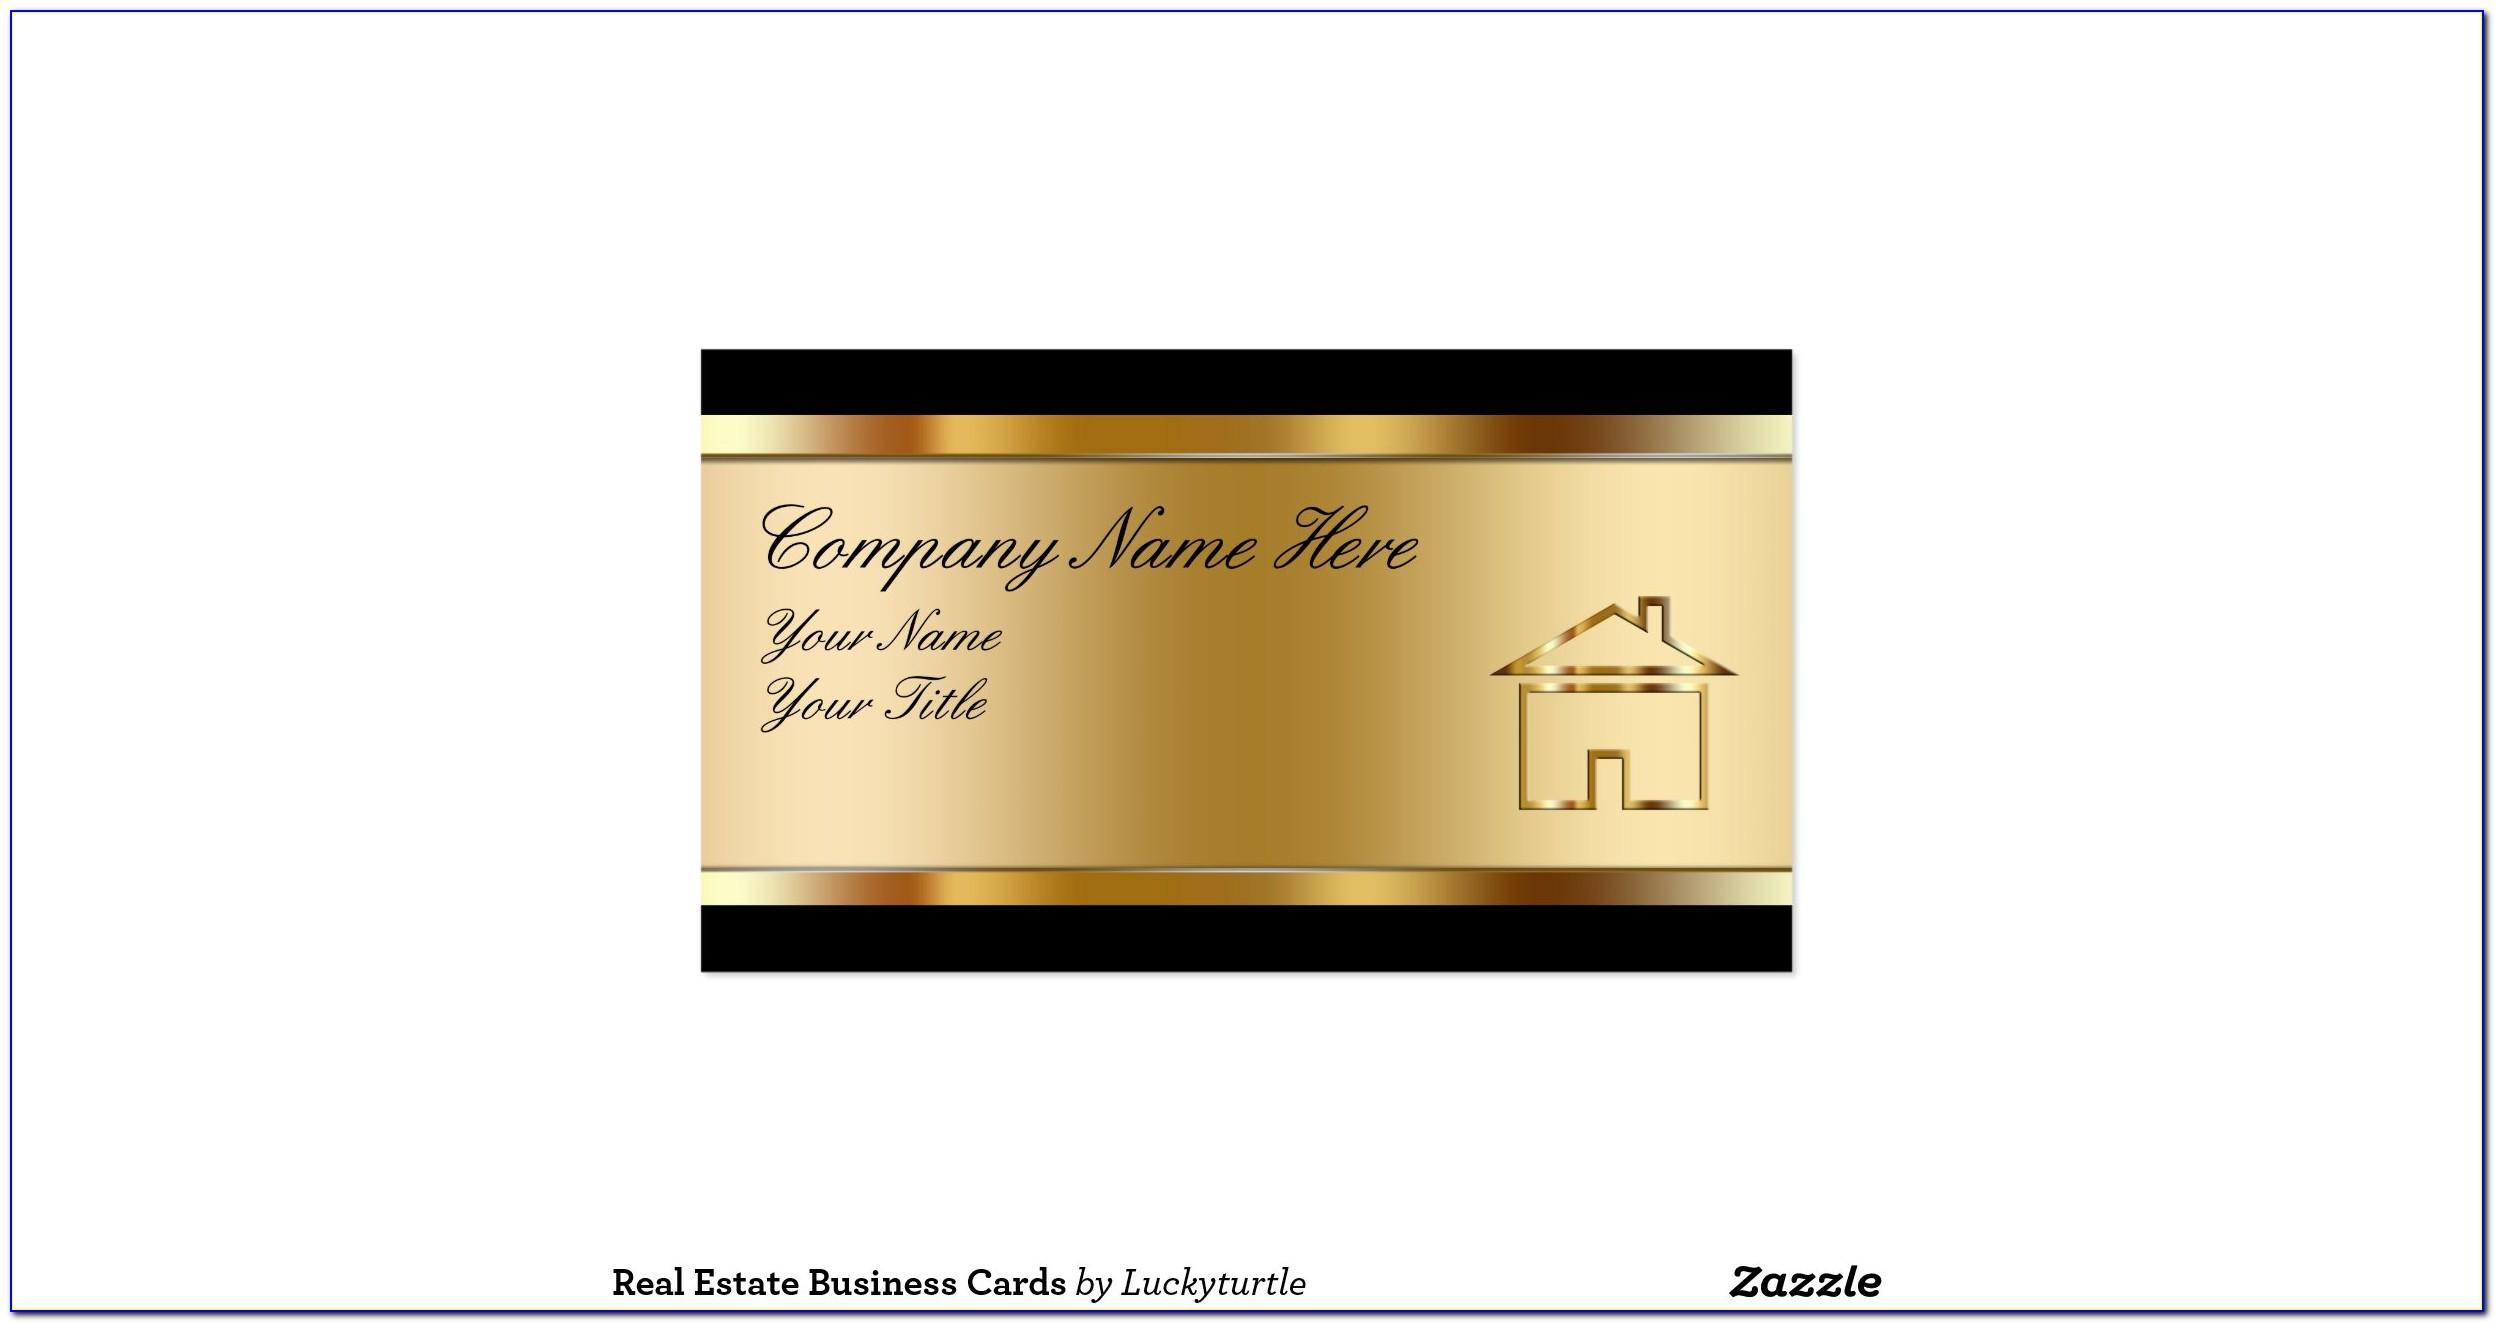 Zazzle Business Cards Nails